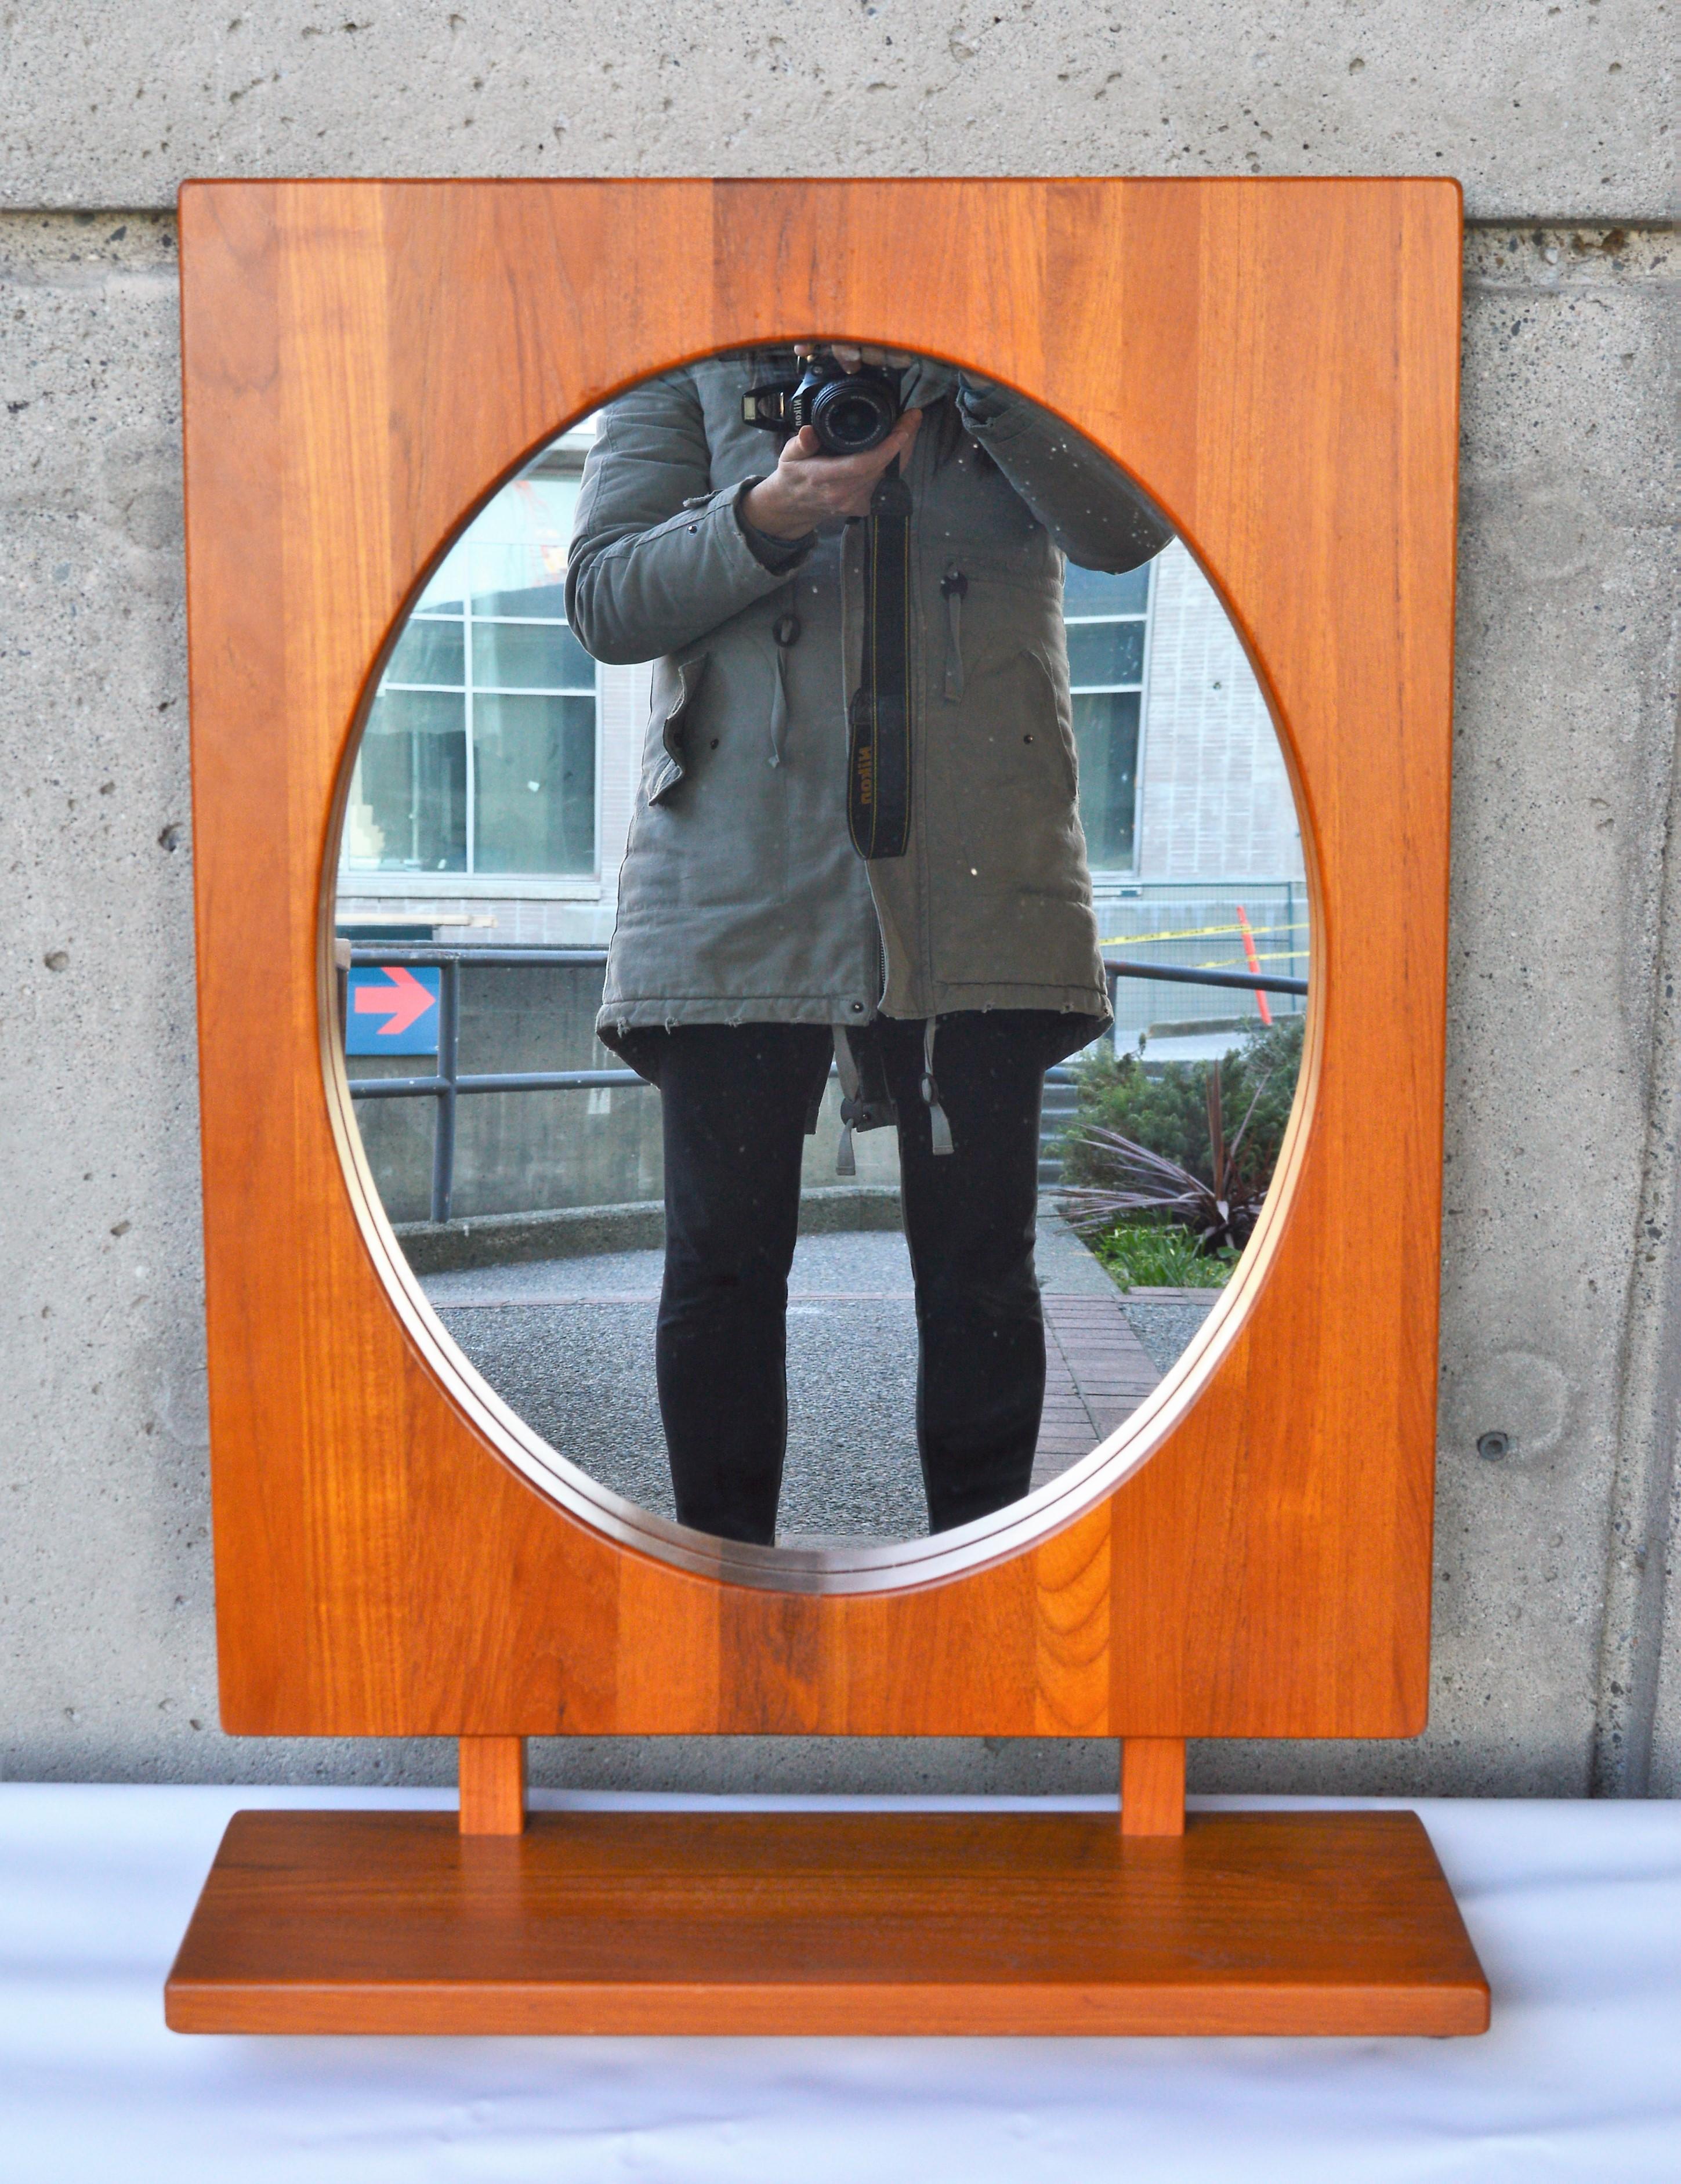 Mid-20th Century Solid Teak Table or Wall Mirror with Shelf in Oval by Pedersen & Hansen, Denmark For Sale